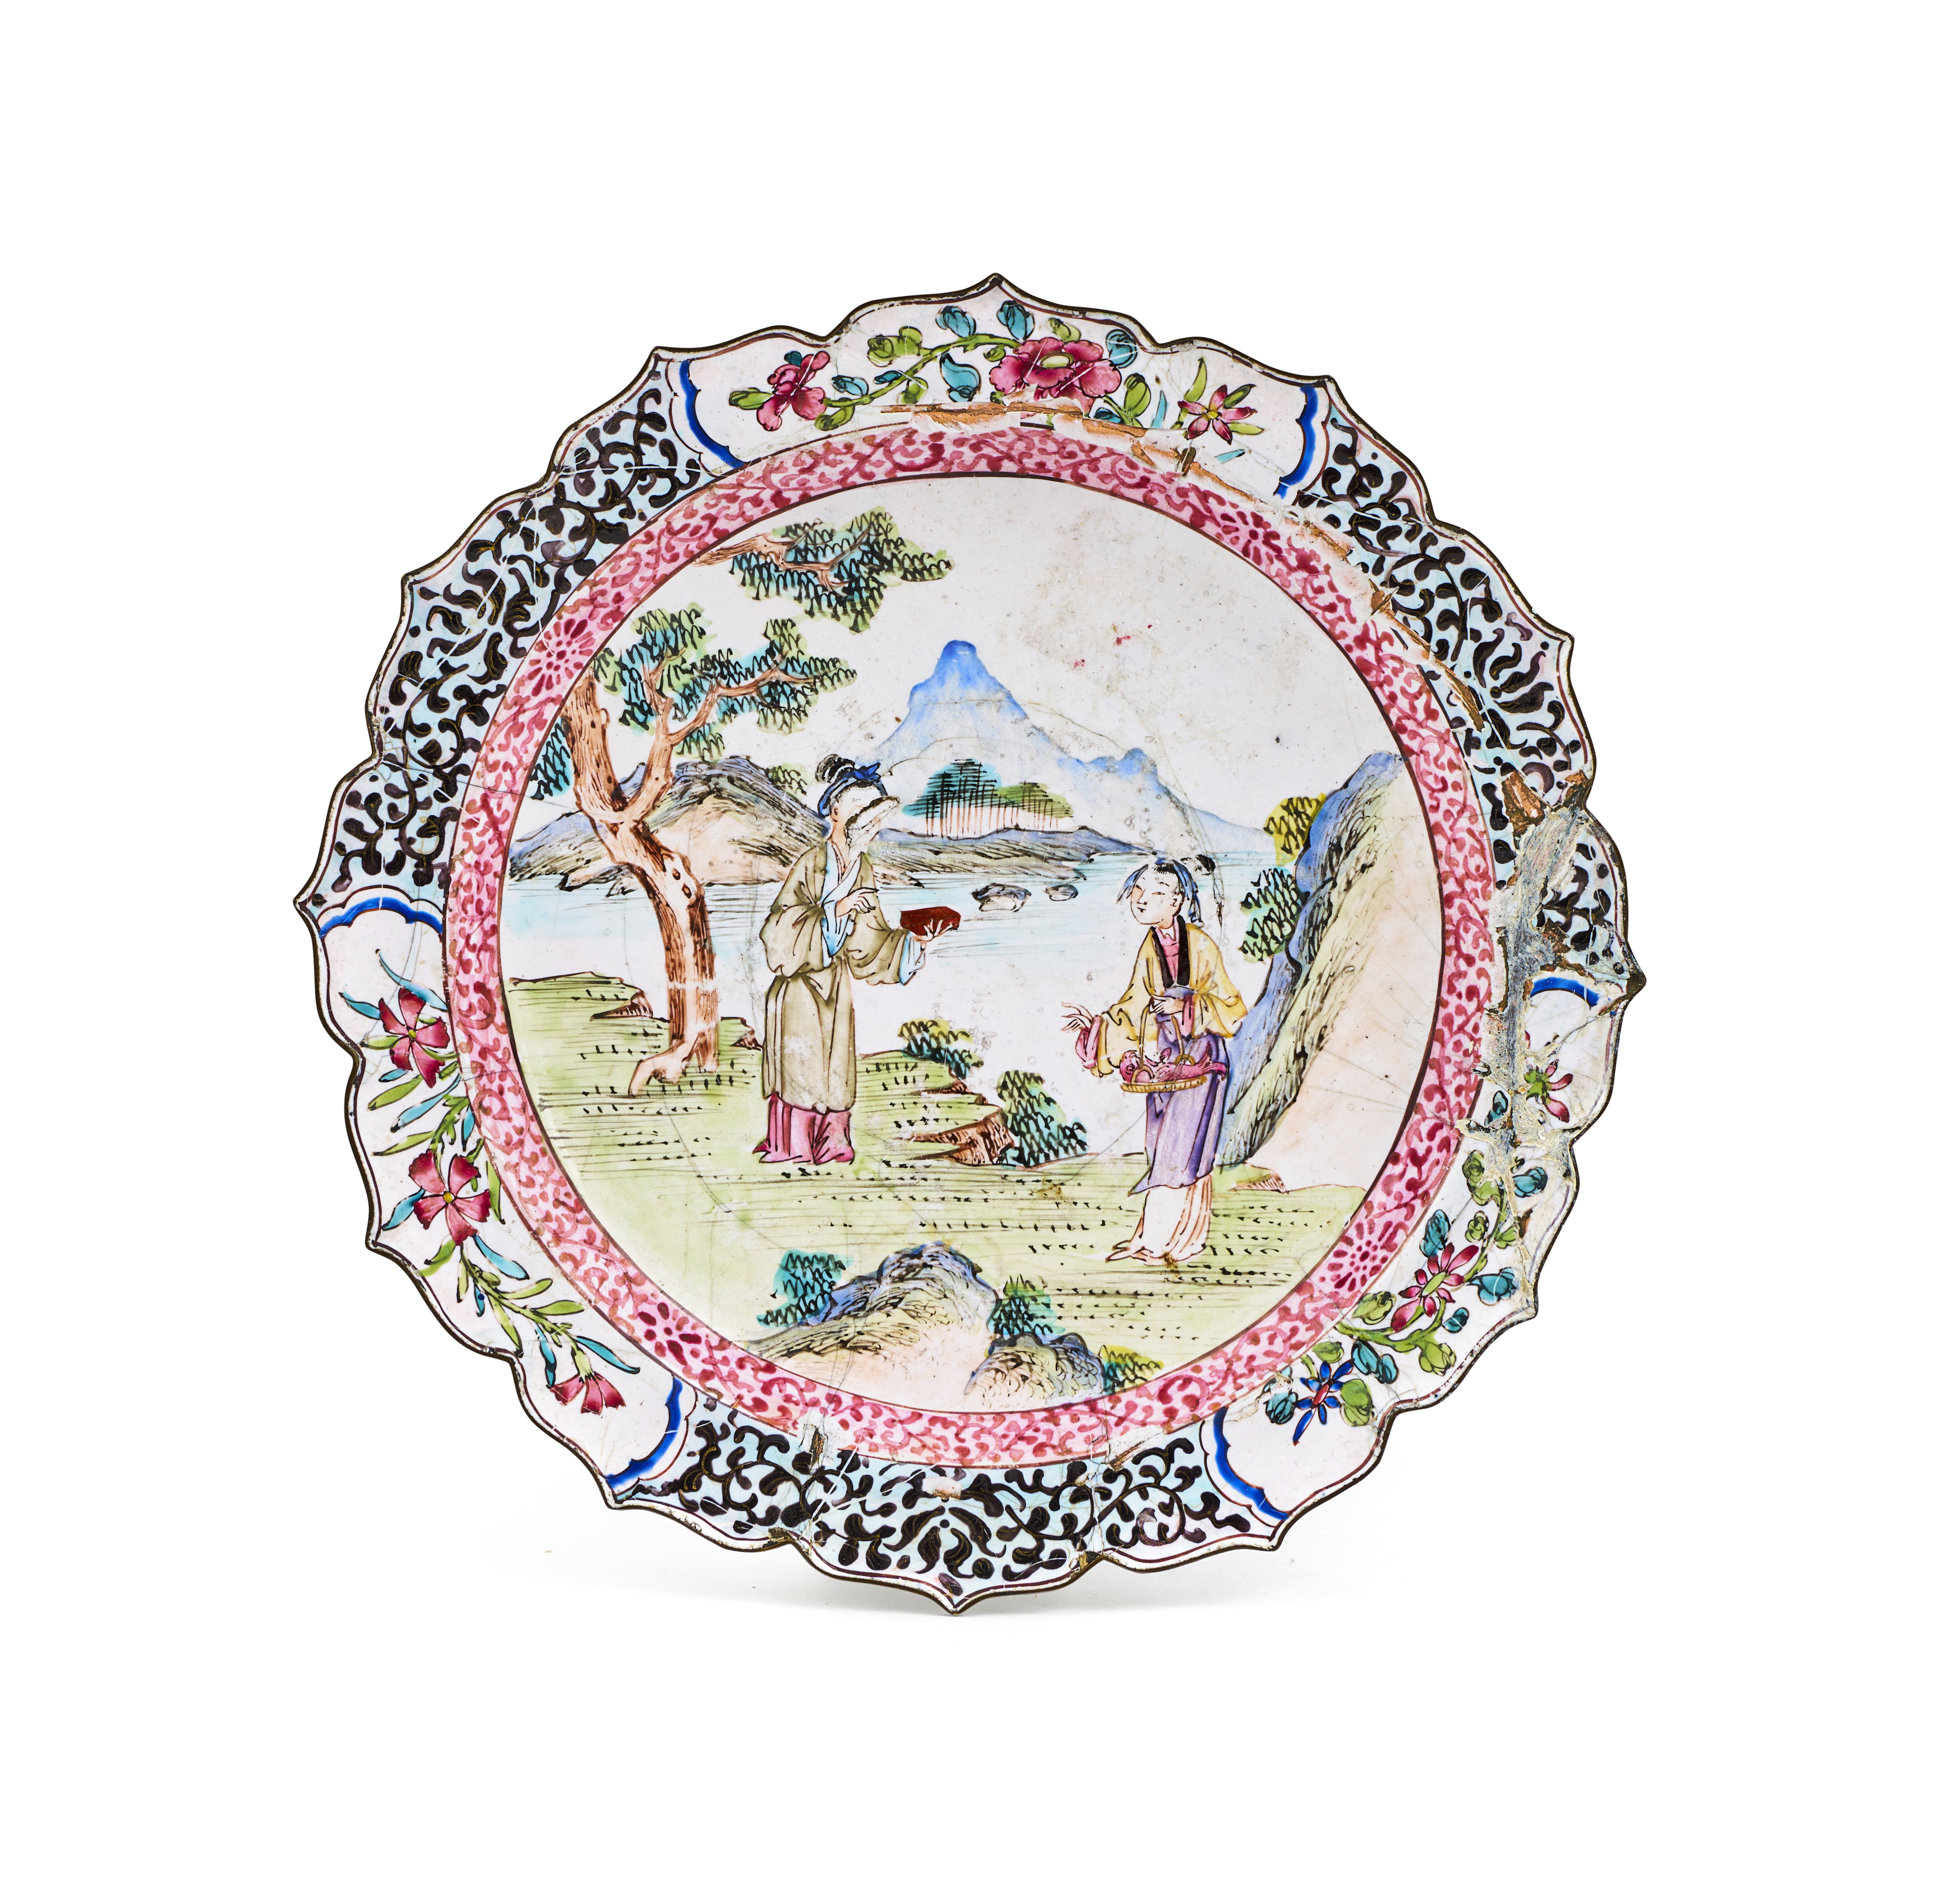 A CHINESE CANTON ENAMEL INCENSE BURNER & DISH, 18TH/19TH CENTURY - Image 5 of 6